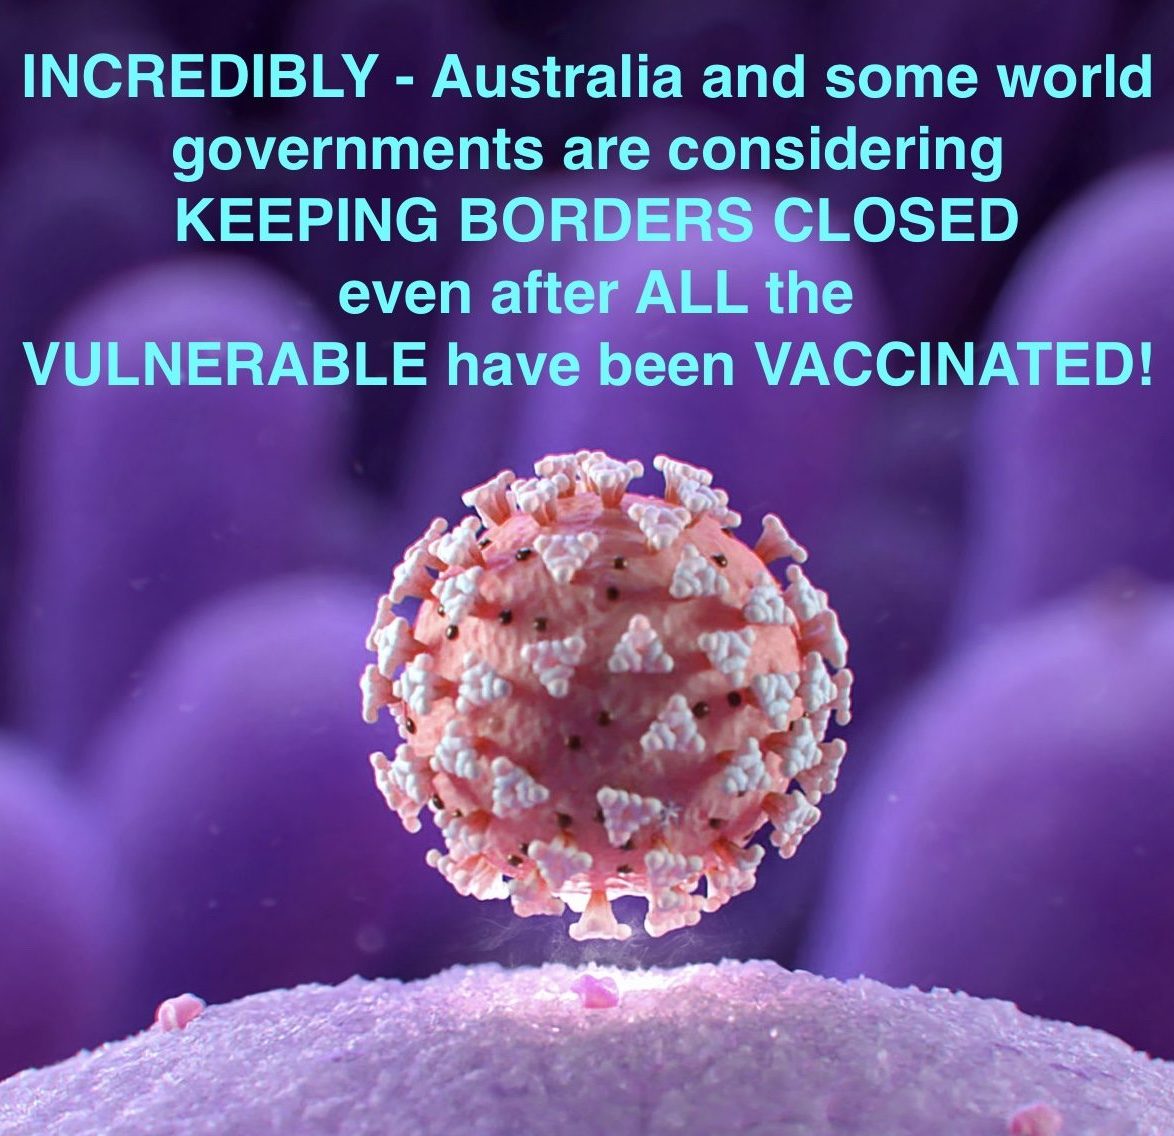 KEEPING BORDERS CLOSED even after all the Vulnerable have been Vaccinated! – REALLY? WHY???